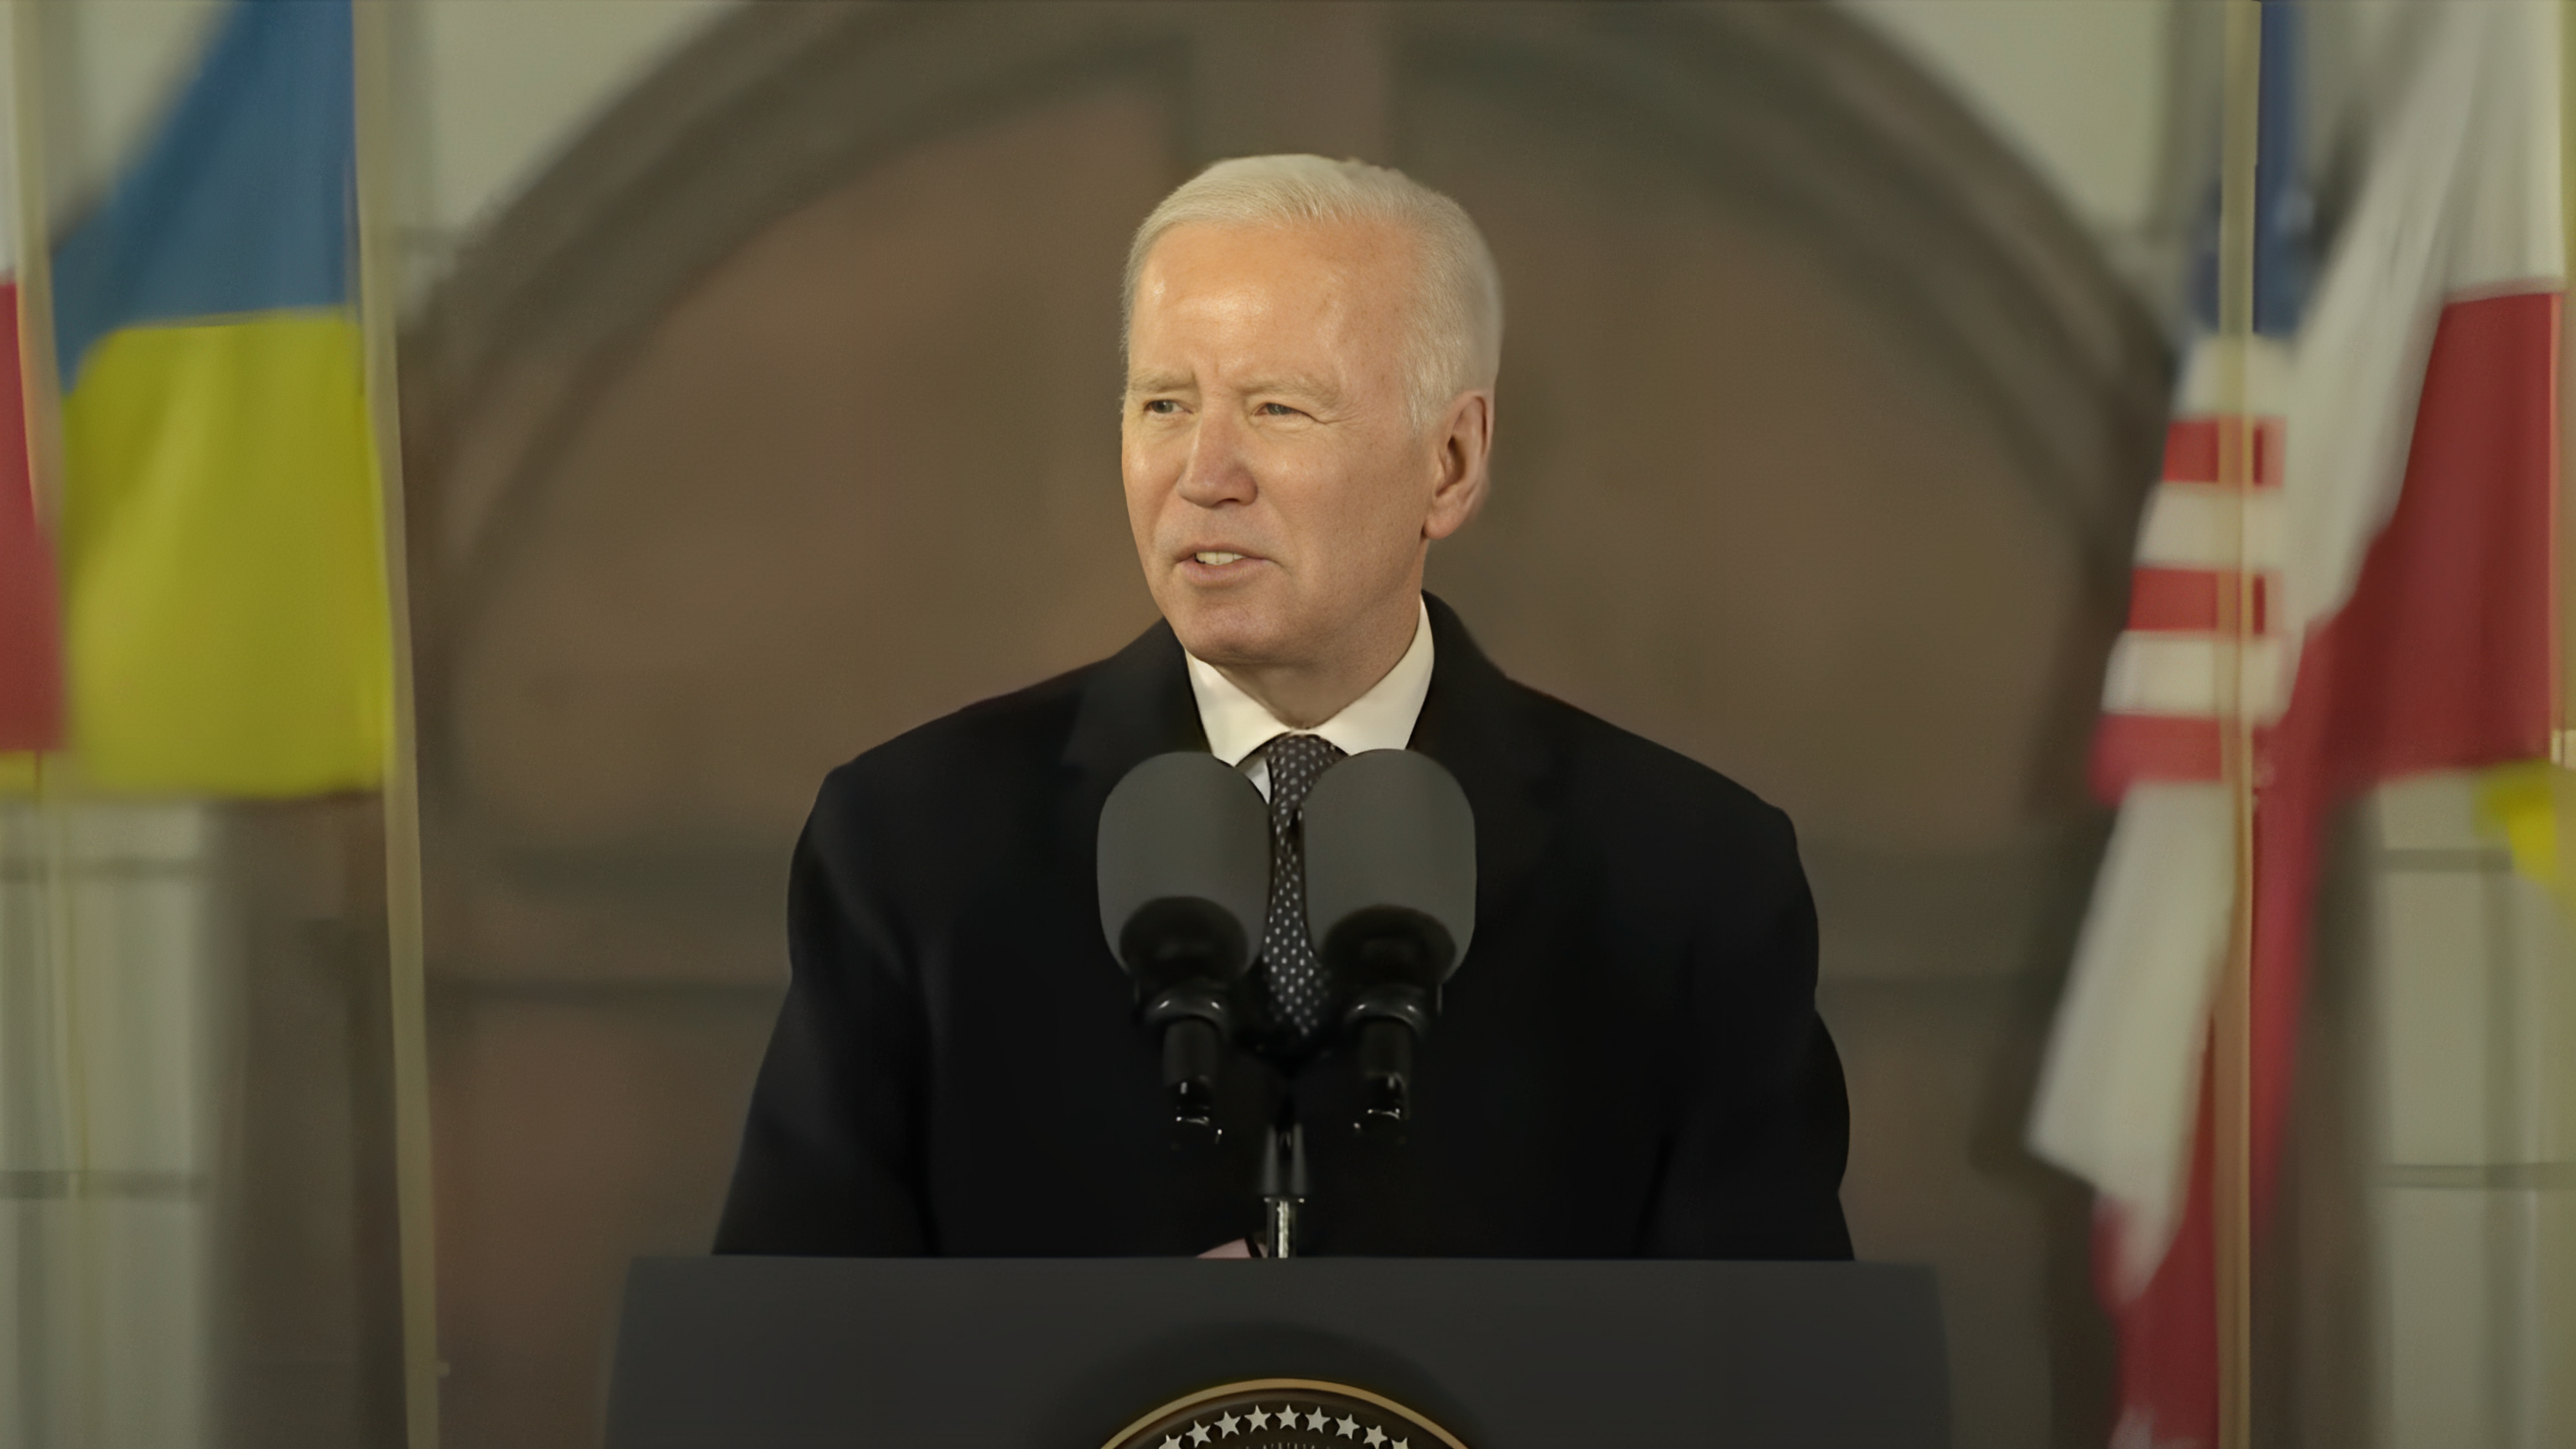 Biden signs executive order, instructing AI development to promote “equity”